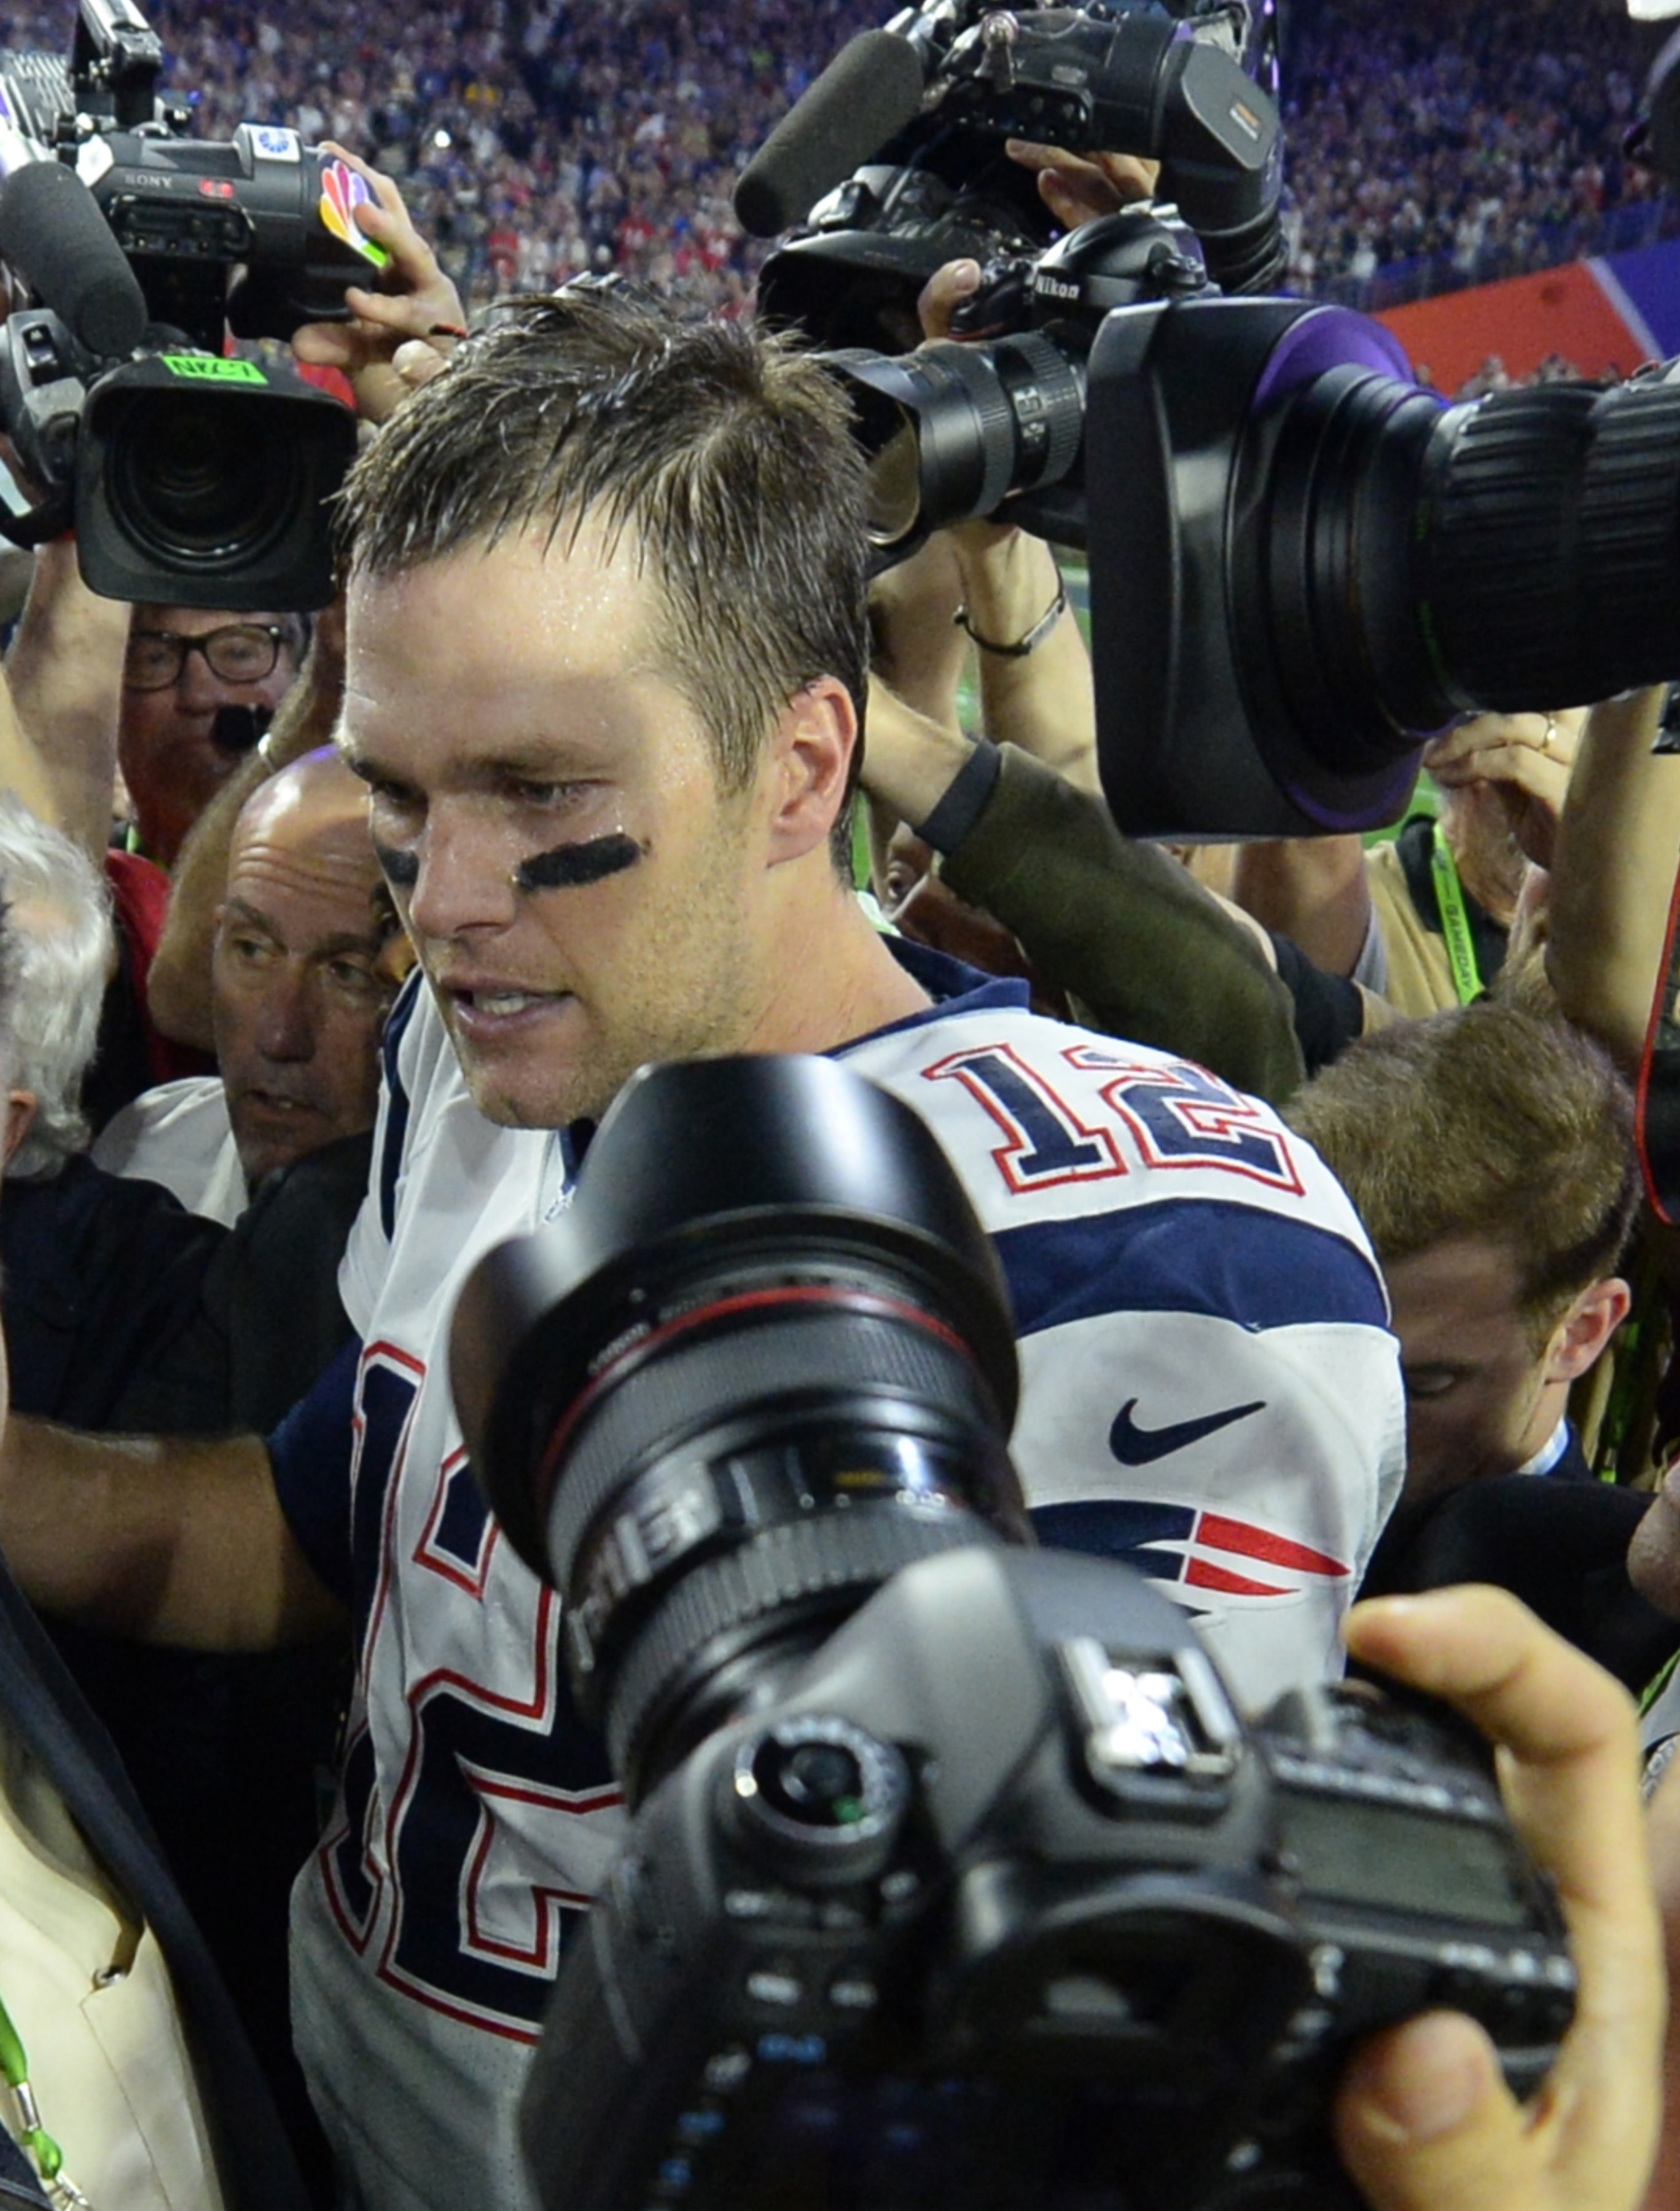 Quarterback Tom Brady of New England Patriots is surrounded by cameras following victory over the Seattle Seahawks in Super Bowl XLIX  on Feb. 1, 2015 in Glendale, Arizona. (TIMOTHY A. CLARY—Getty Images)